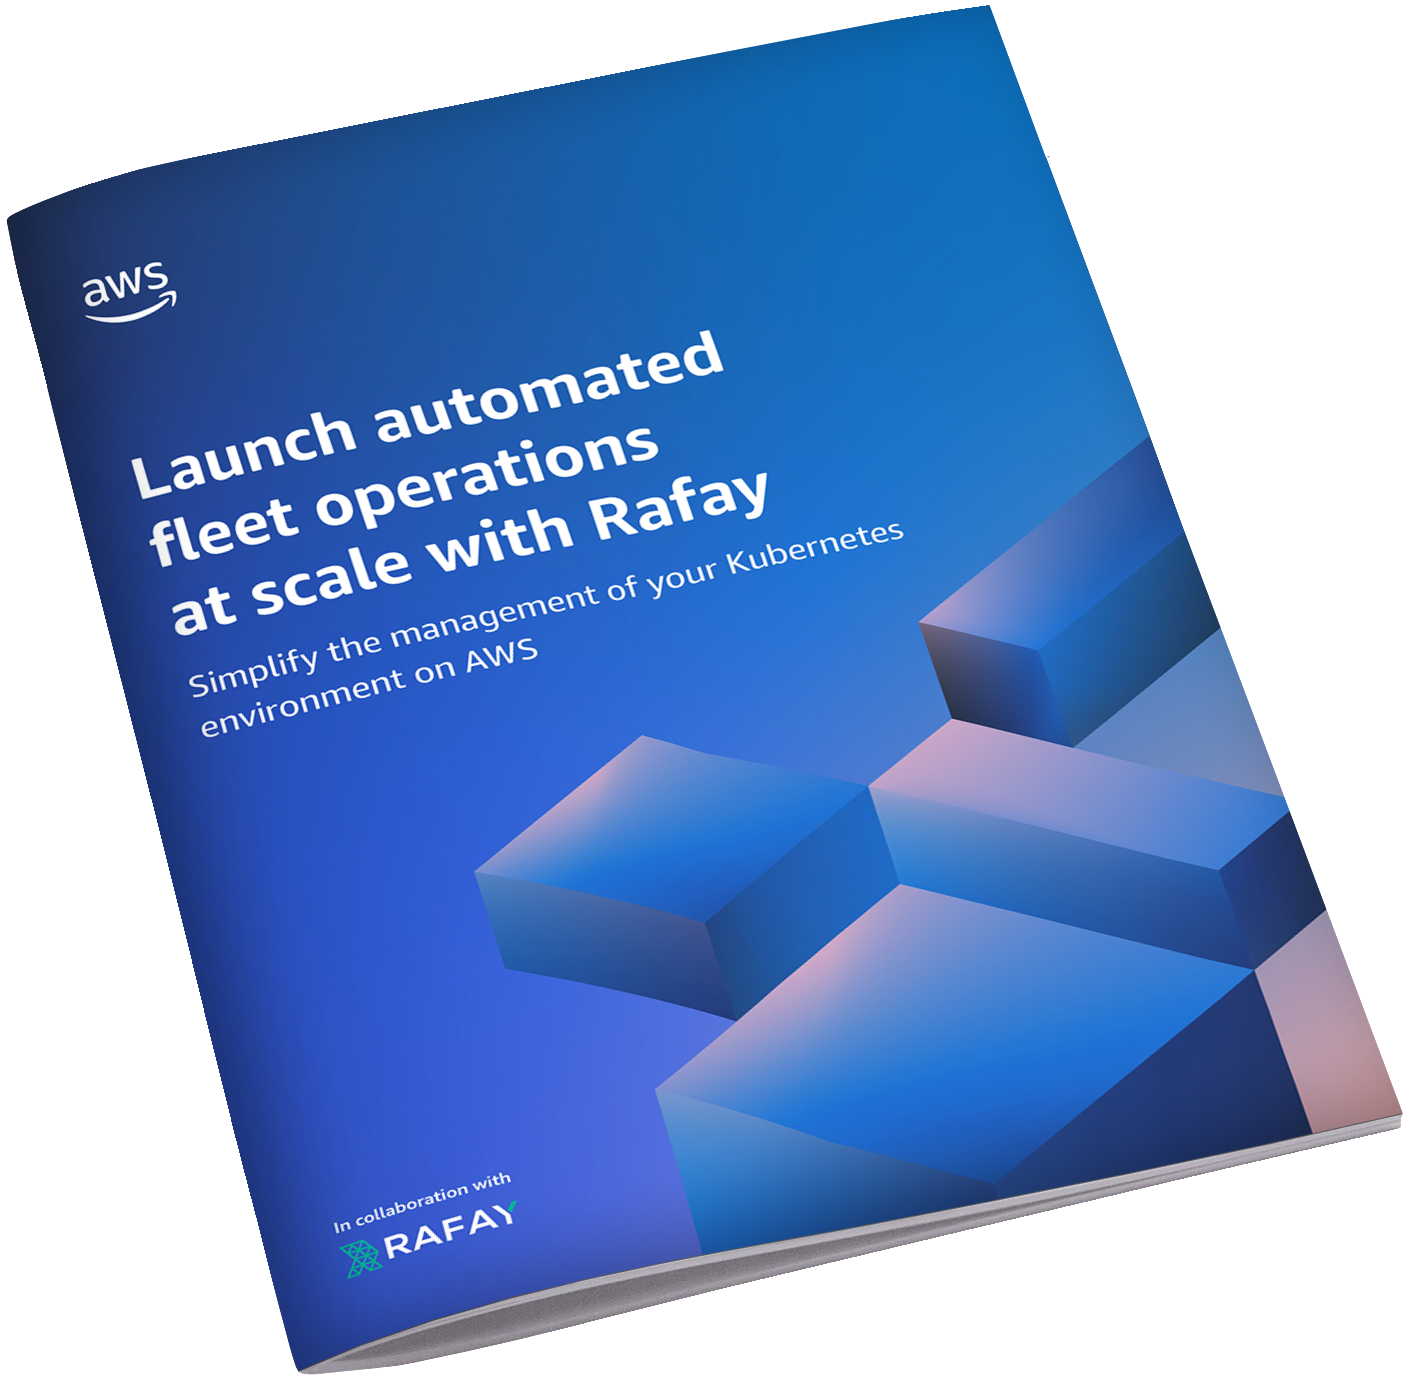 image for Launch Automated Fleet Operations at Scale with Rafay